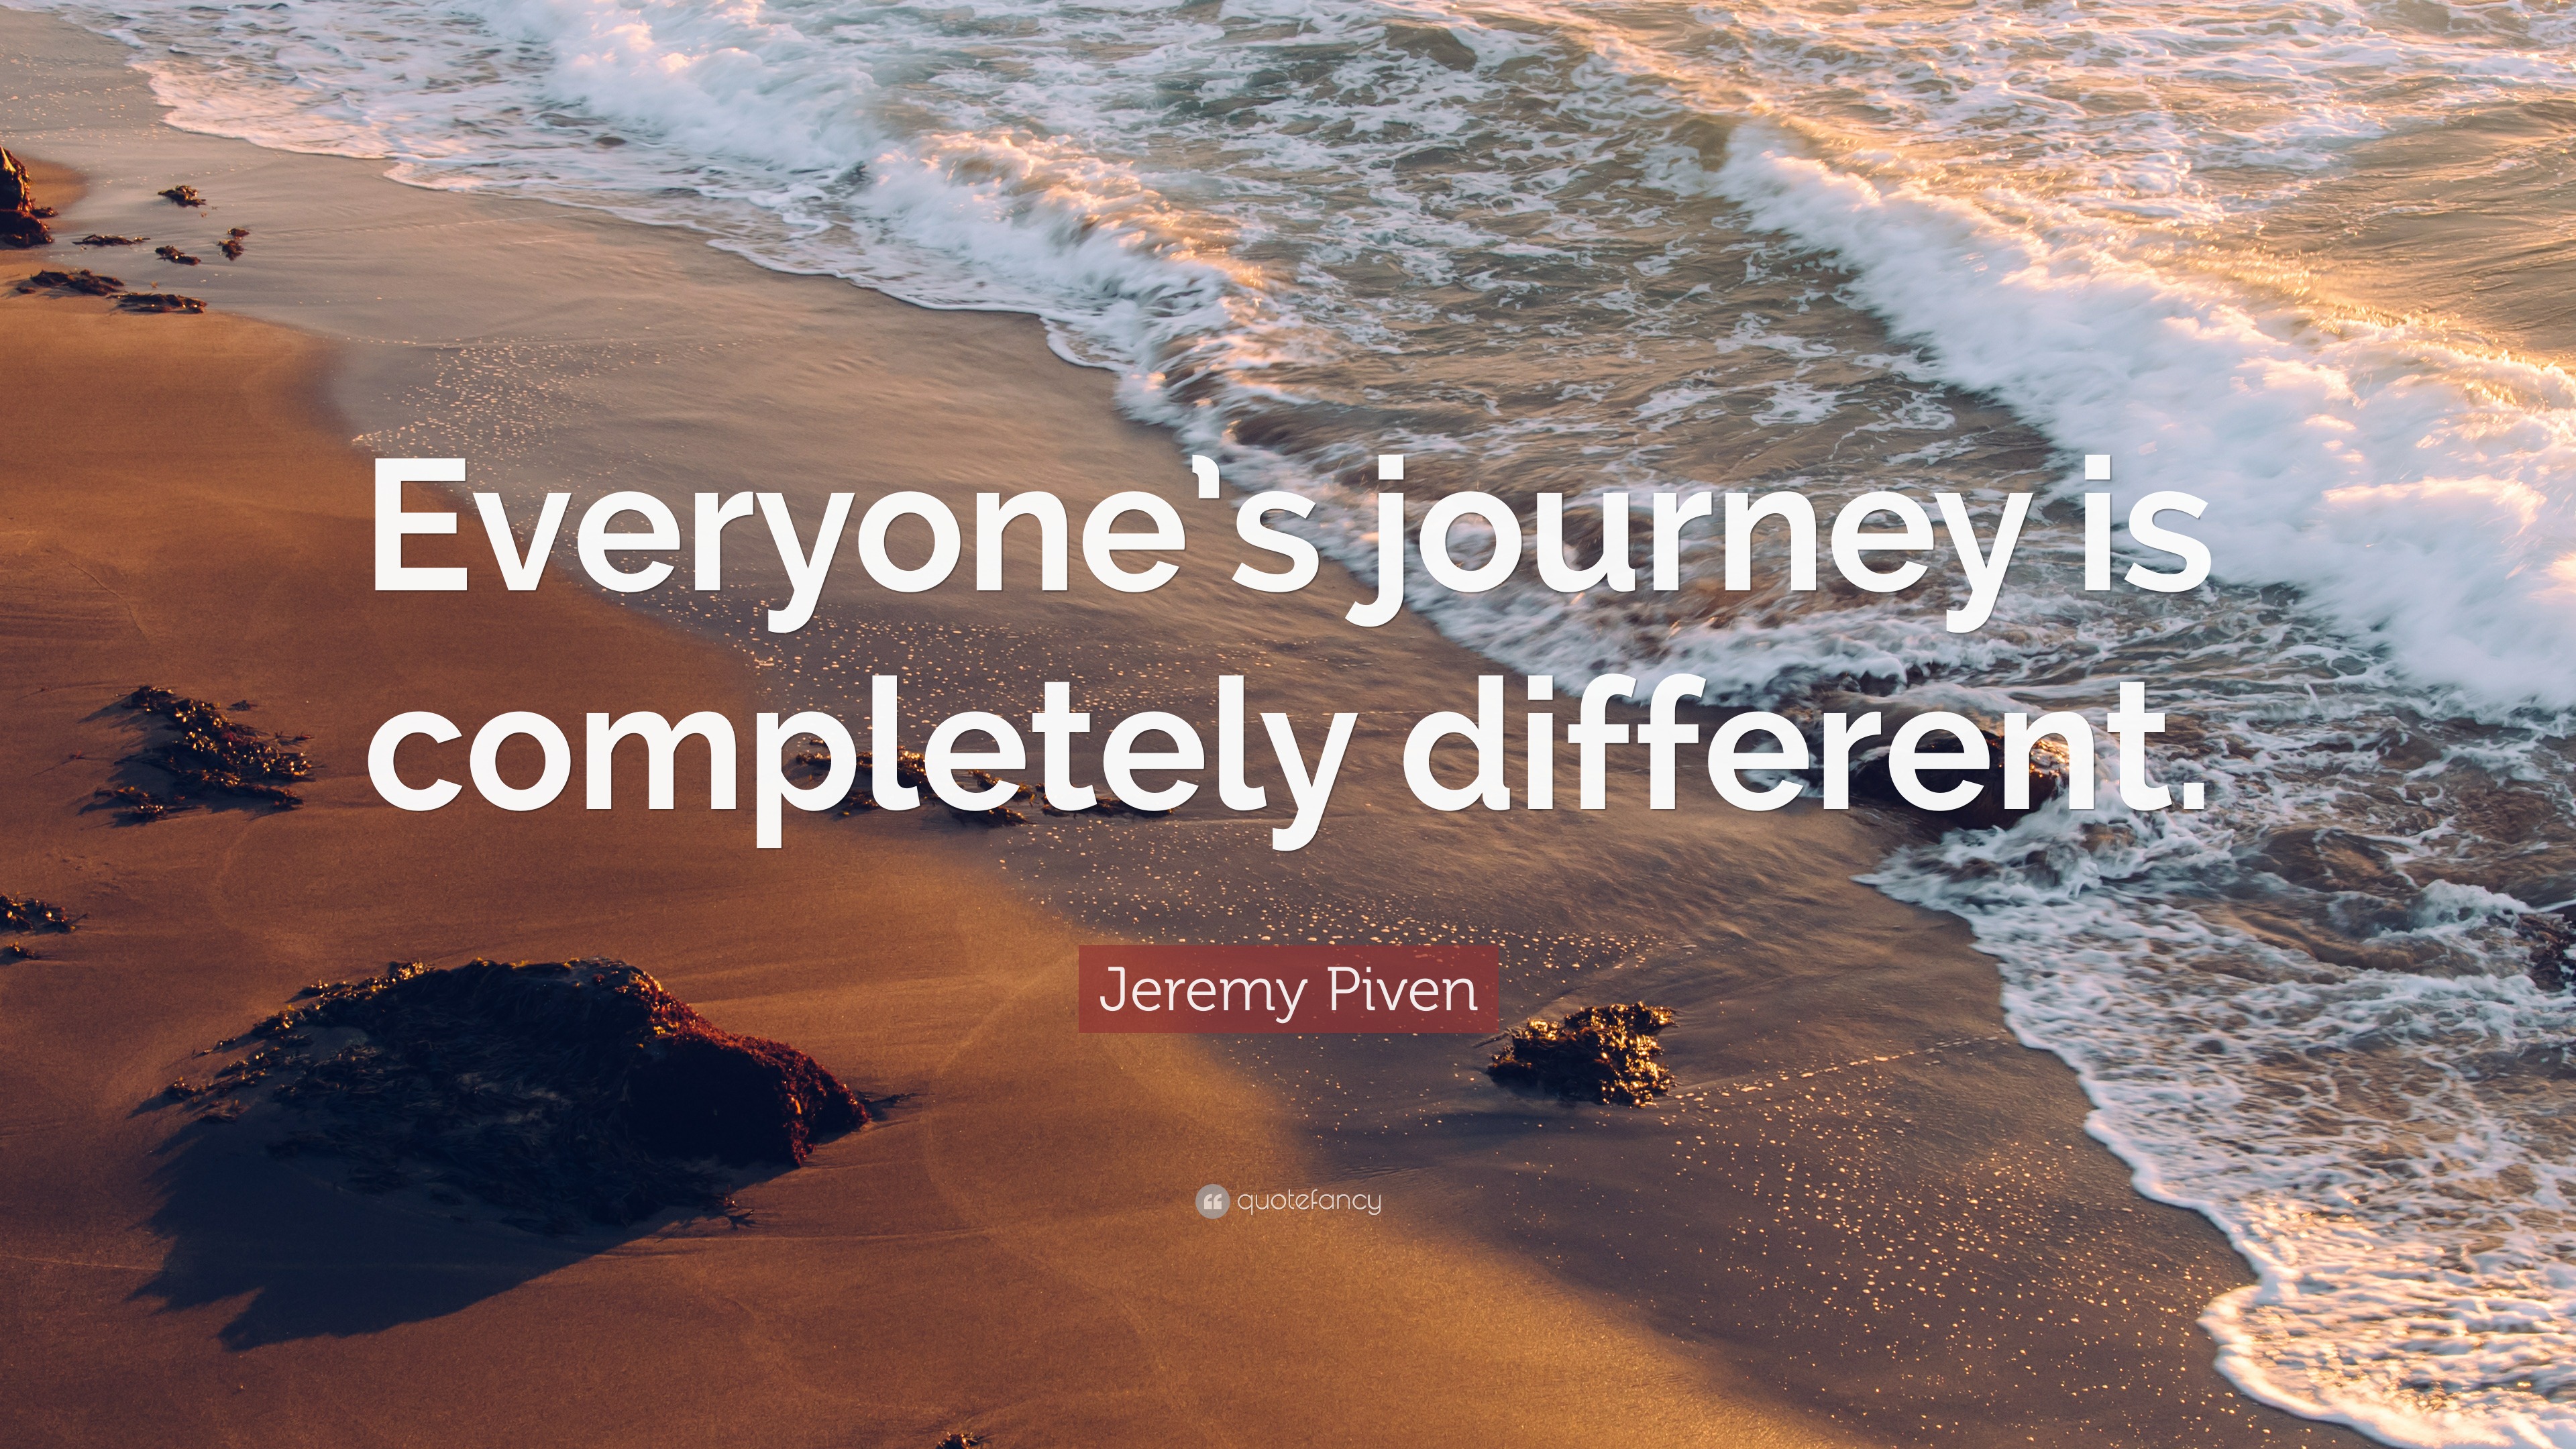 every journey is different